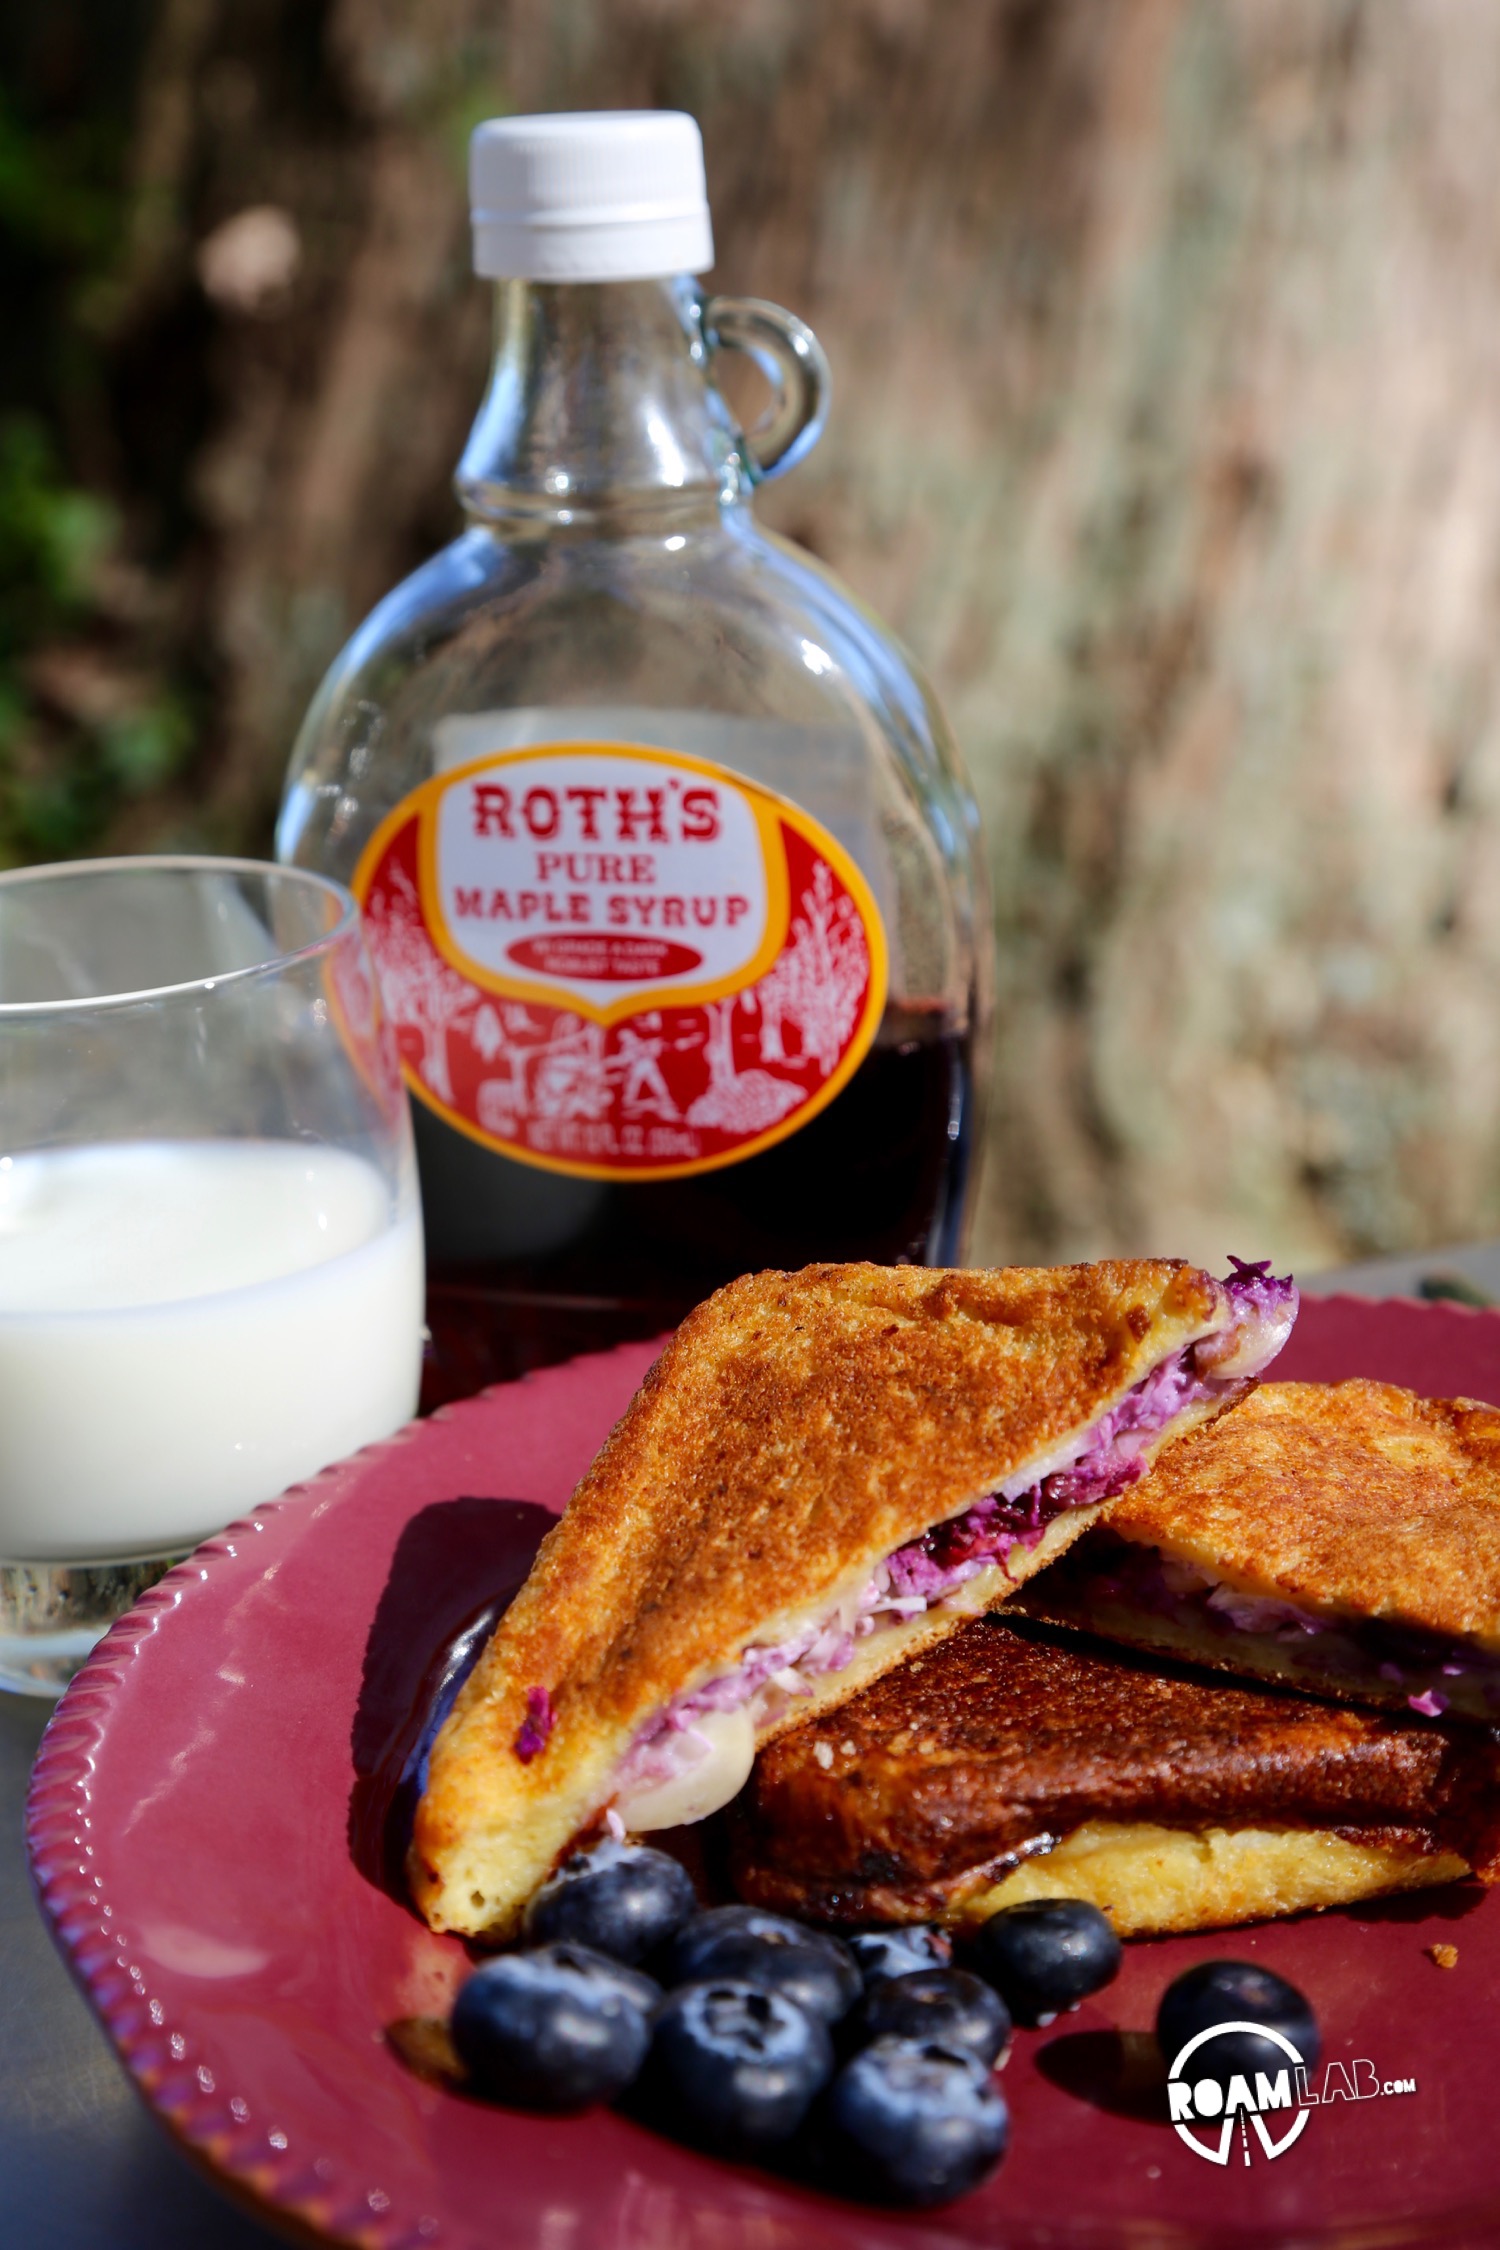 There is a day of adventure ahead of us, and it all starts with a little breakfast number that I like to call: Camper's Blueberry Almond French Toast.